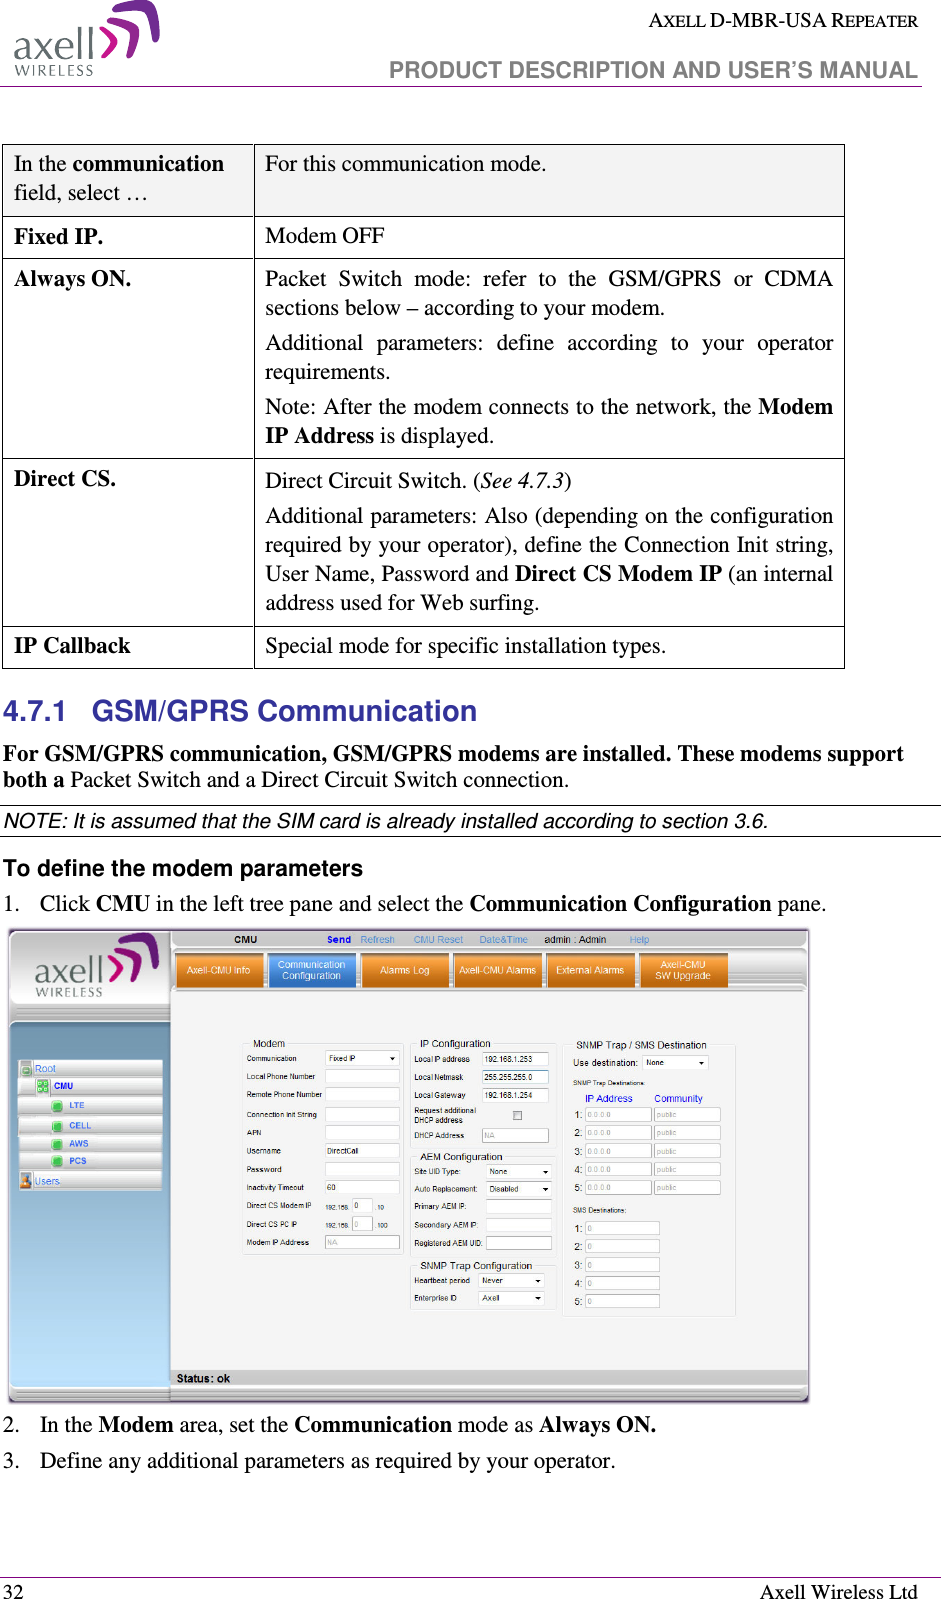  AXELL D-MBR-USA REPEATER   PRODUCT DESCRIPTION AND USER’S MANUAL  32    Axell Wireless Ltd  In the communication field, select … For this communication mode.  Fixed IP. Modem OFF Always ON.  Packet  Switch  mode:  refer  to  the  GSM/GPRS  or  CDMA sections below – according to your modem. Additional  parameters:  define  according  to  your  operator requirements. Note: After the modem connects to the network, the Modem IP Address is displayed. Direct CS.  Direct Circuit Switch. (See  4.7.3) Additional parameters: Also (depending on the configuration required by your operator), define the Connection Init string, User Name, Password and Direct CS Modem IP (an internal address used for Web surfing. IP Callback Special mode for specific installation types. 4.7.1  GSM/GPRS Communication For GSM/GPRS communication, GSM/GPRS modems are installed. These modems support both a Packet Switch and a Direct Circuit Switch connection.  NOTE: It is assumed that the SIM card is already installed according to section  3.6.  To define the modem parameters 1.  Click CMU in the left tree pane and select the Communication Configuration pane.   2.  In the Modem area, set the Communication mode as Always ON.  3.  Define any additional parameters as required by your operator.  